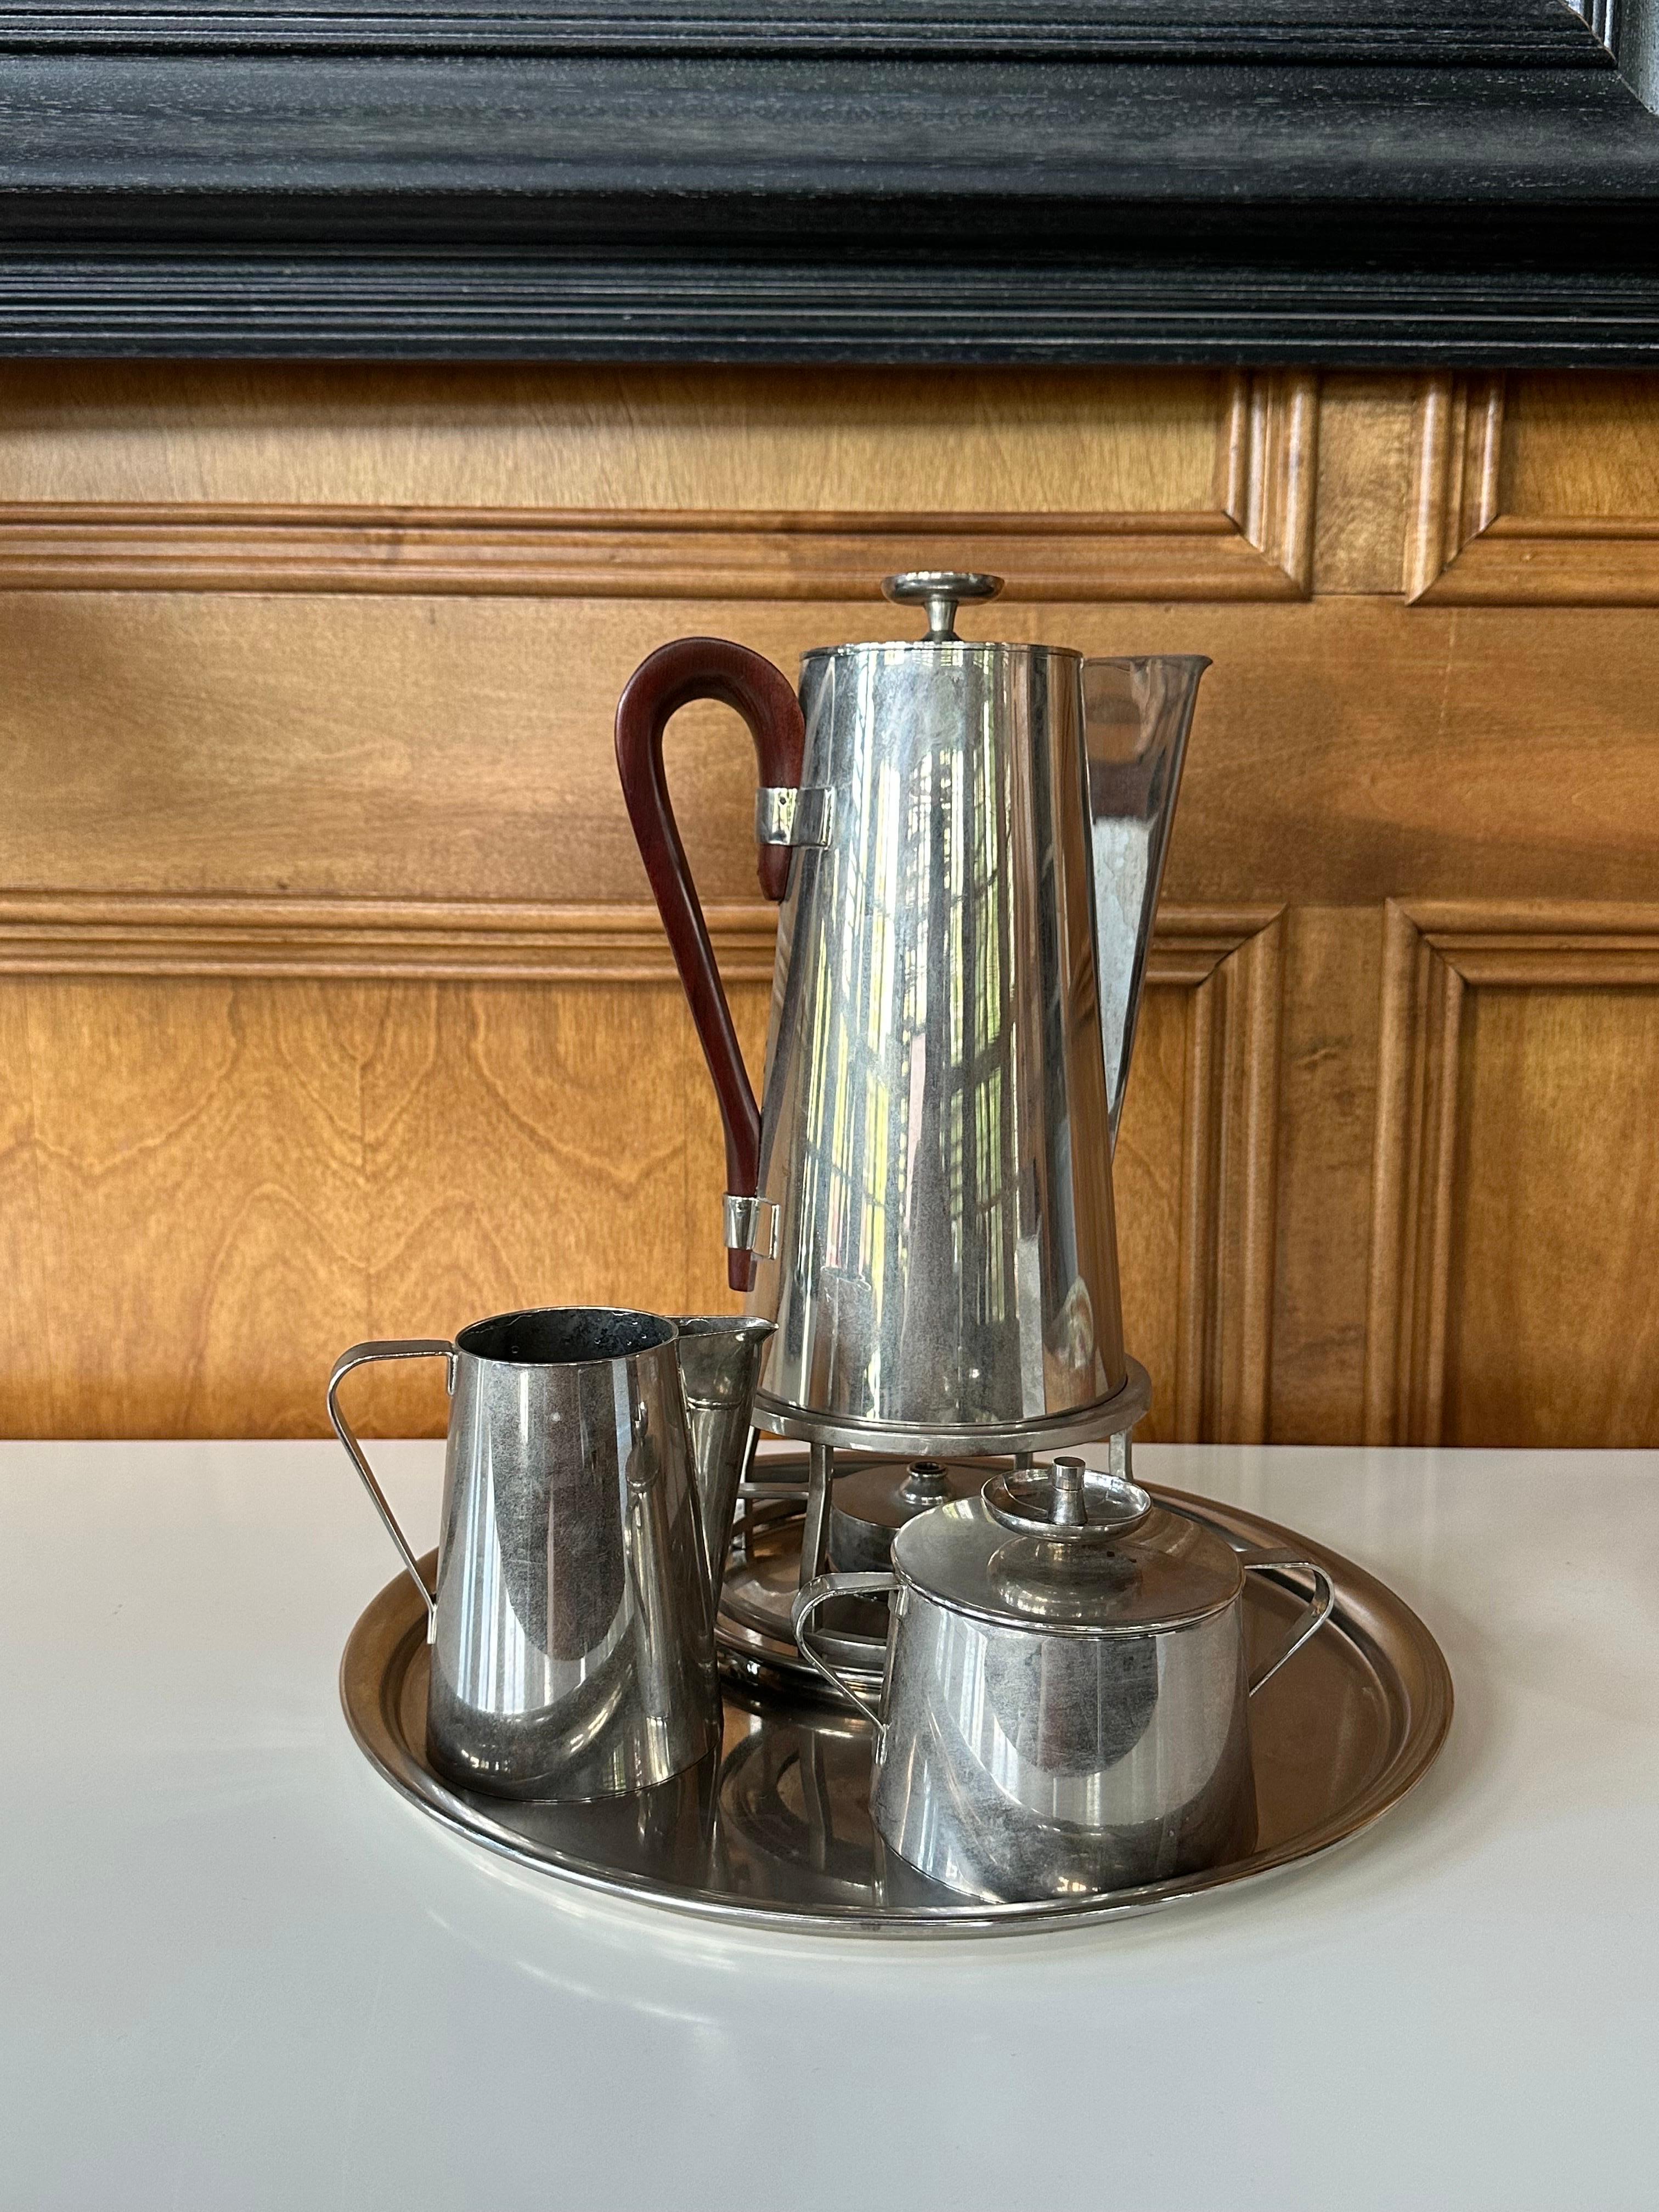 A coffee or tea serving set designed by Tommi Parzinger for Dorlyn Silversmith. The set is made of heavy brass and newly rechromed in a nickle finish. It consists of a pitcher with wood handle equipped with a heater, a creamer, a lidded sugar and a